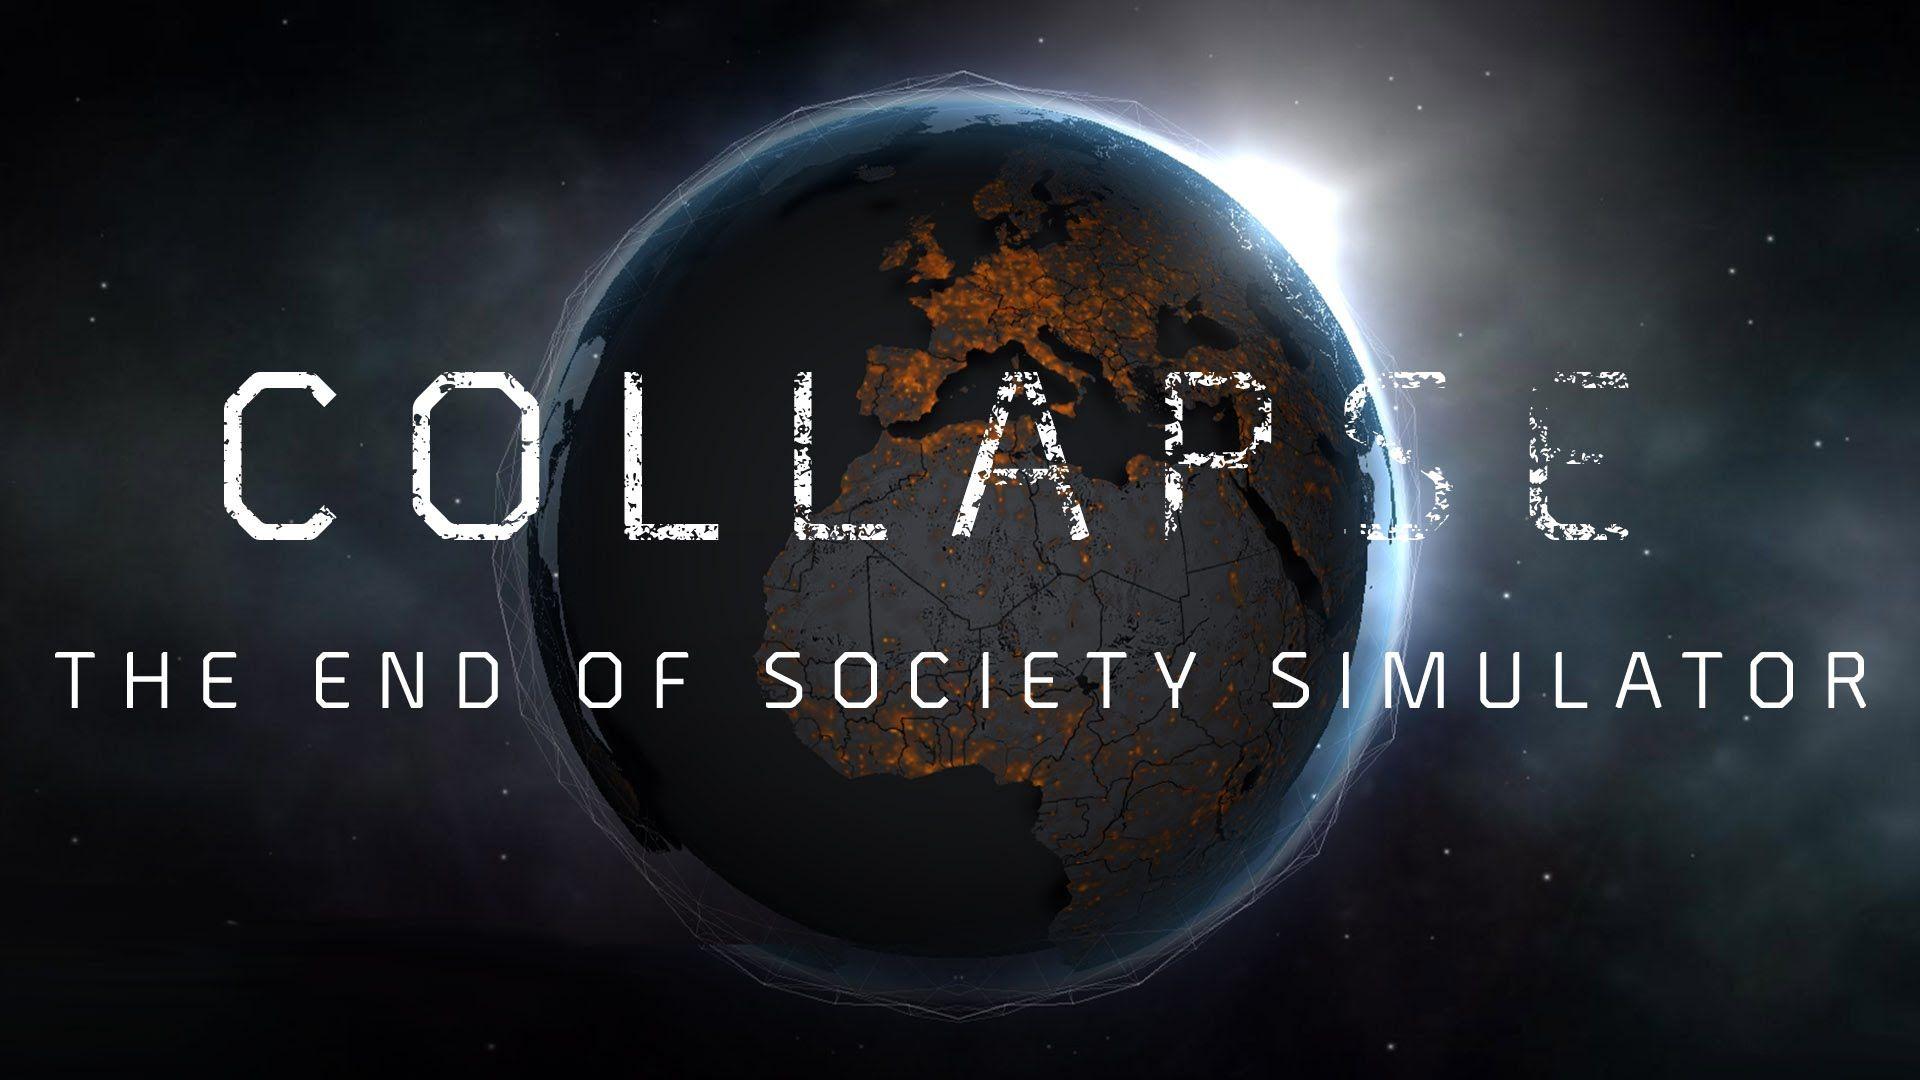 Society simulator. The New Division - circles. Fall Apart картинка Collapse.